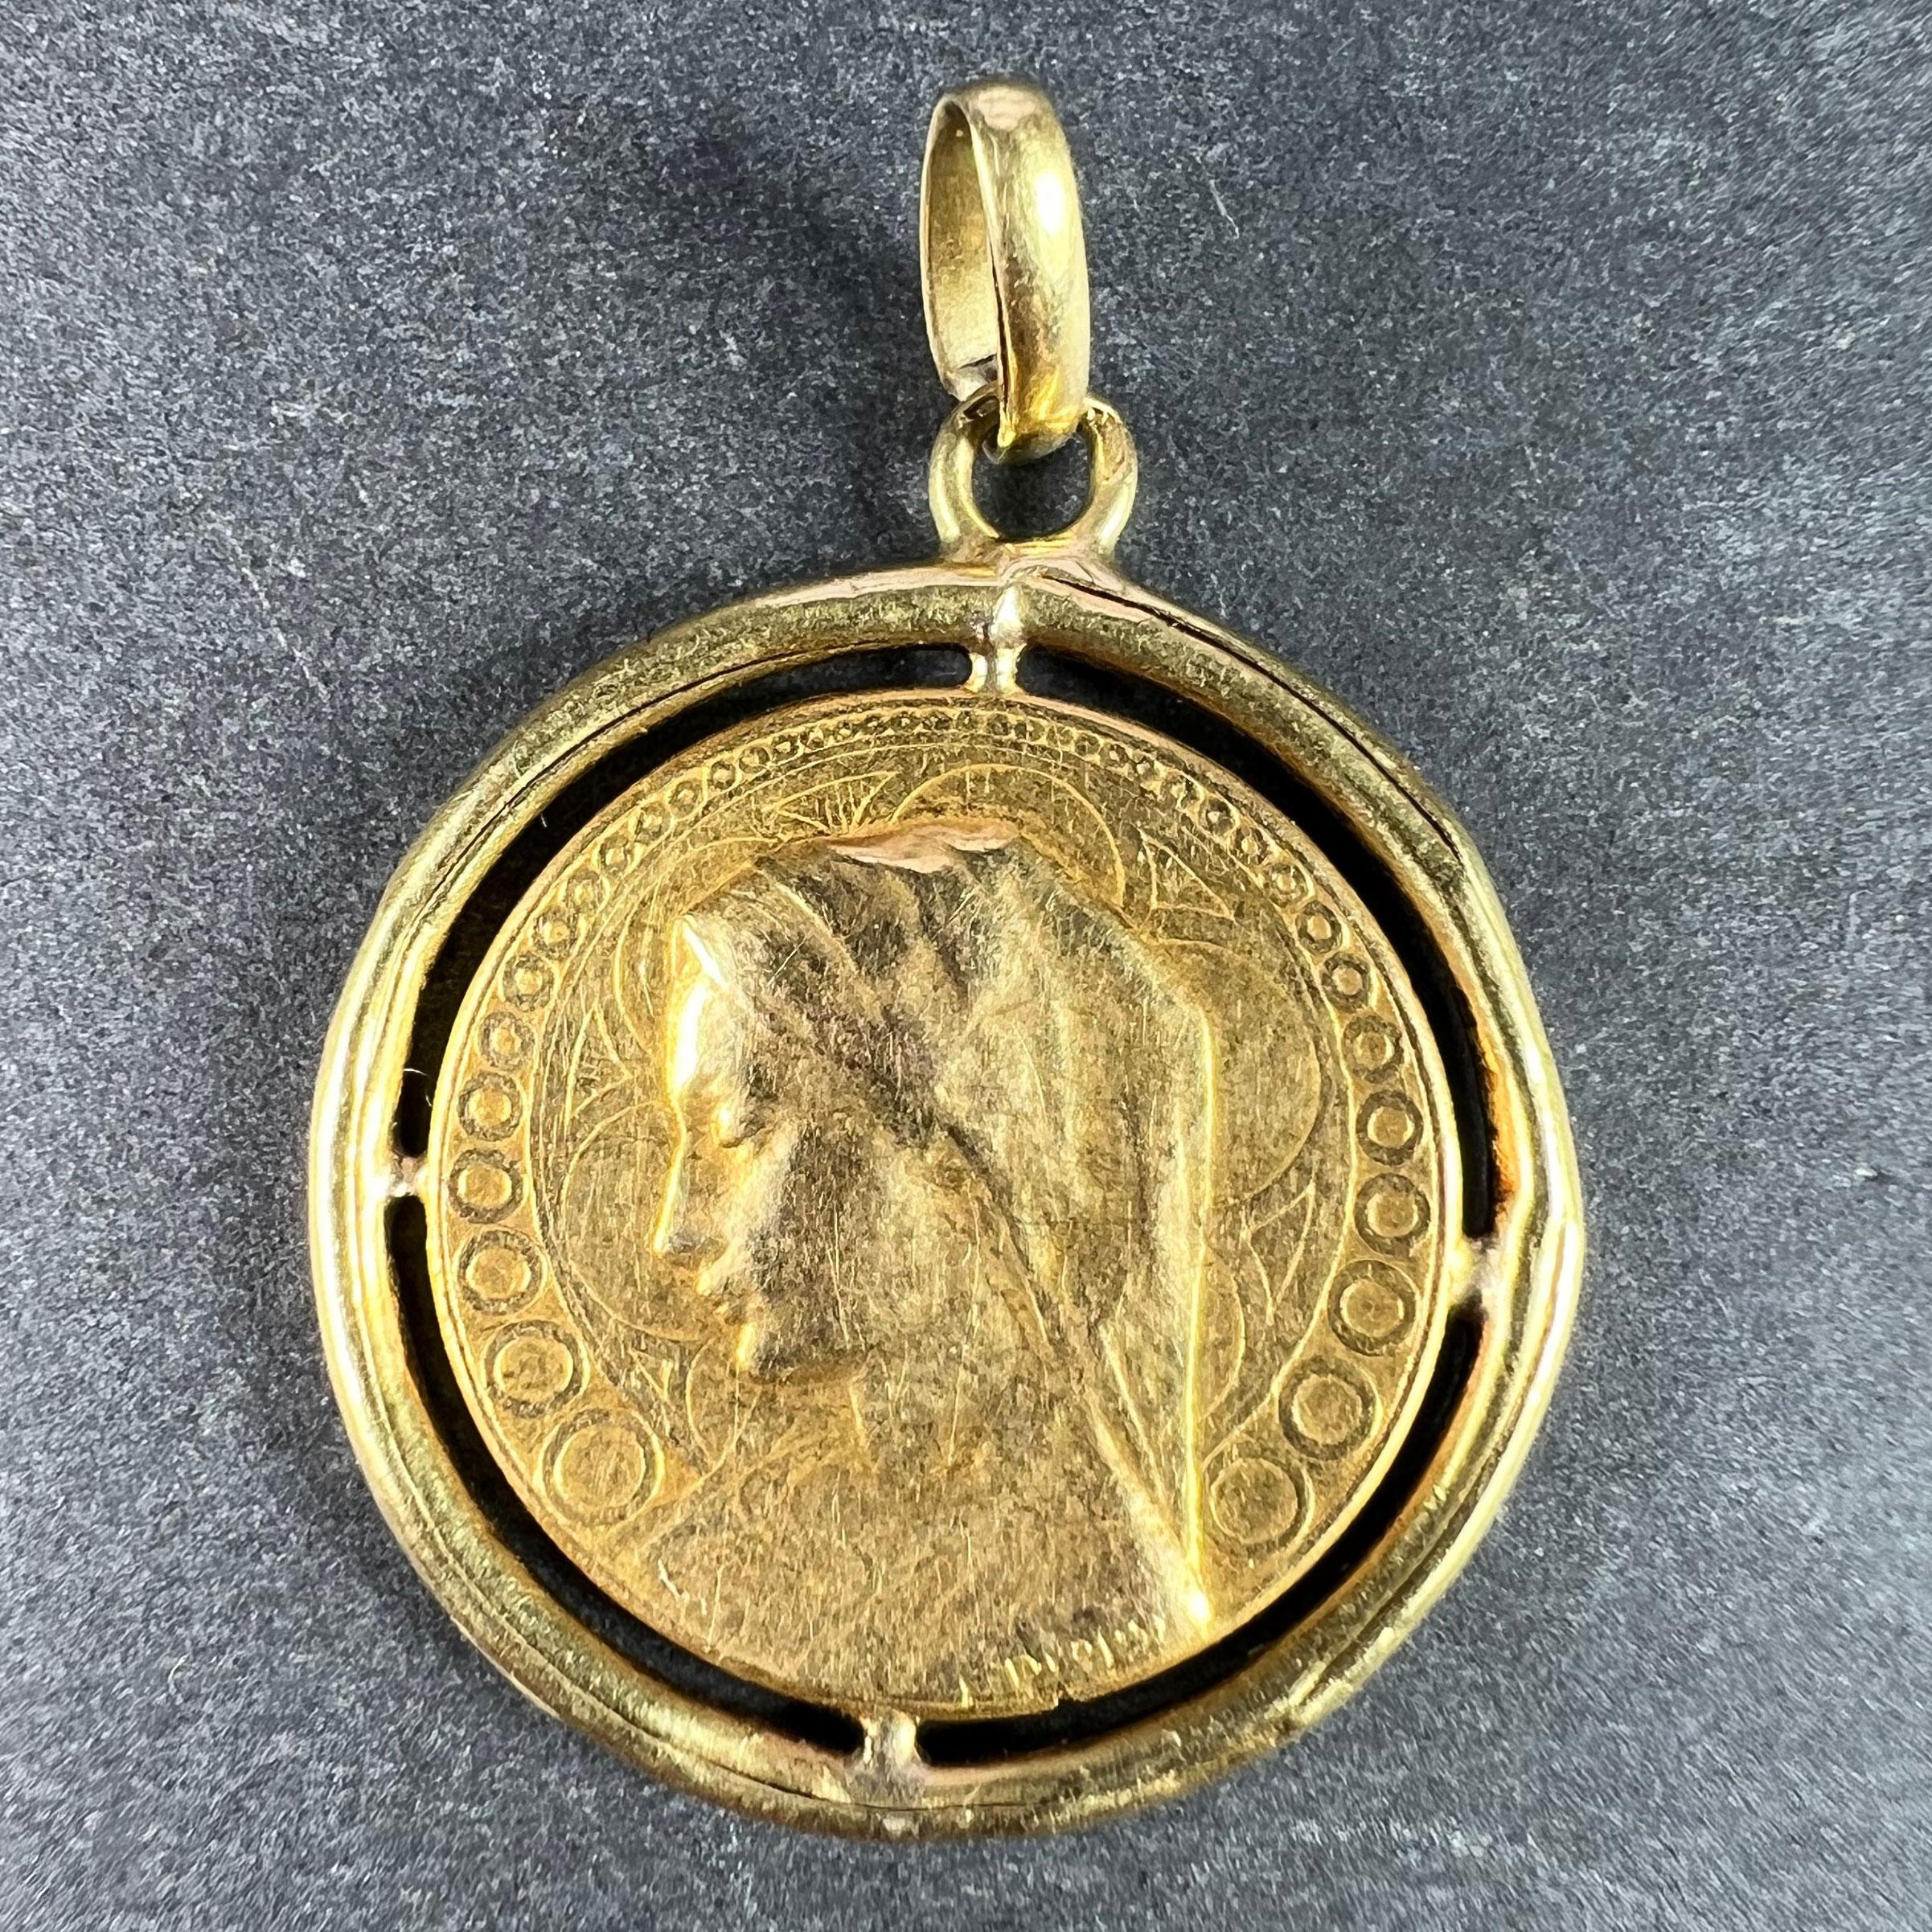 A French 18 karat (18K) yellow gold charm pendant designed as a medal depicting the Virgin Mary within a border of circles signed by E. Dropsy, surrounded by a yellow frame. The reverse features a sheaf of lilies and the phrase 'Virgo Gloriosa'